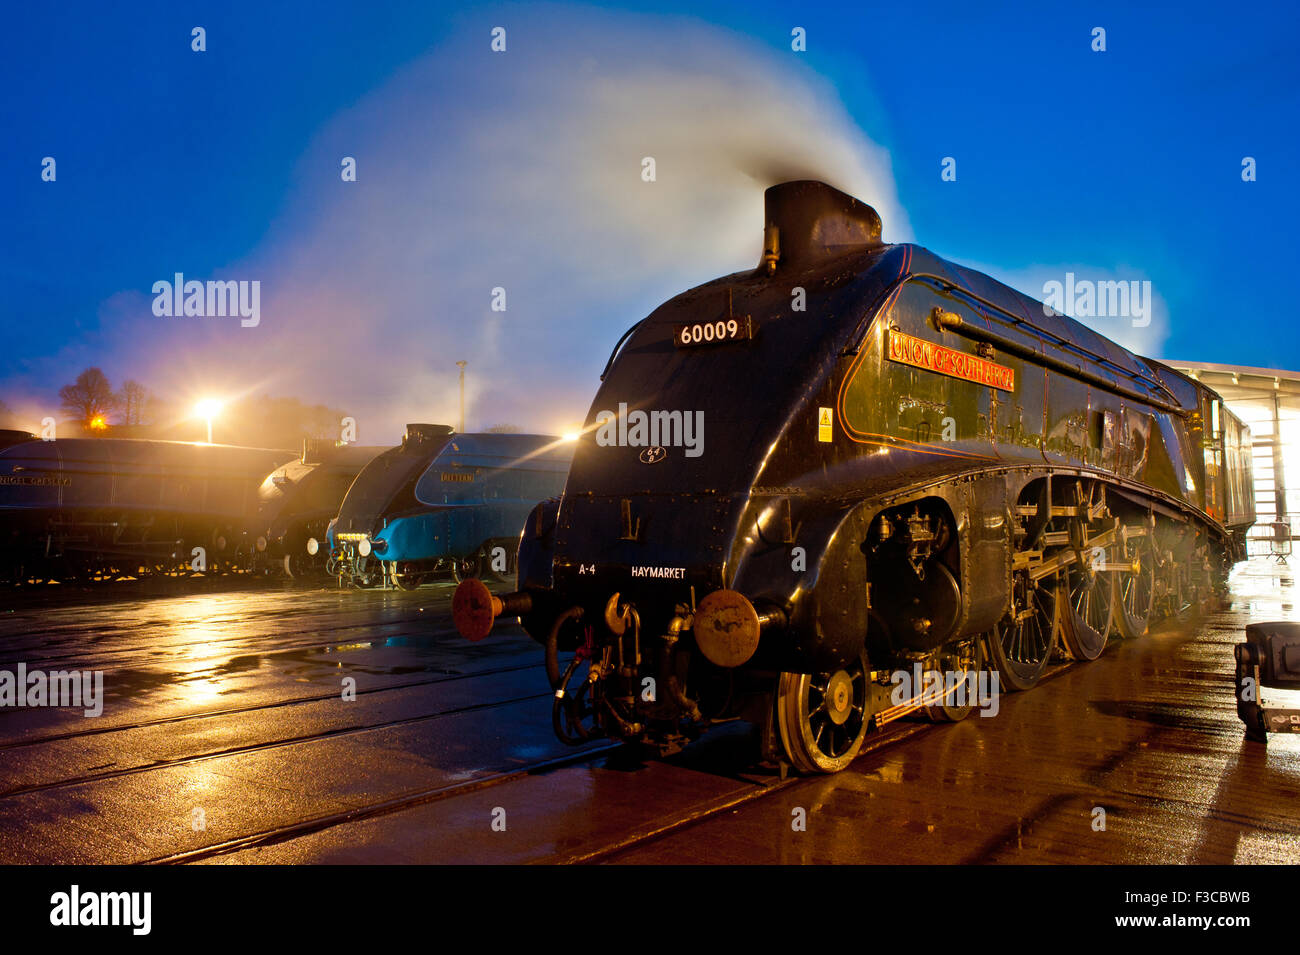 the great gathering A4 class Steam Engines at Night, Locomotion museum Shildon county Durham Stock Photo